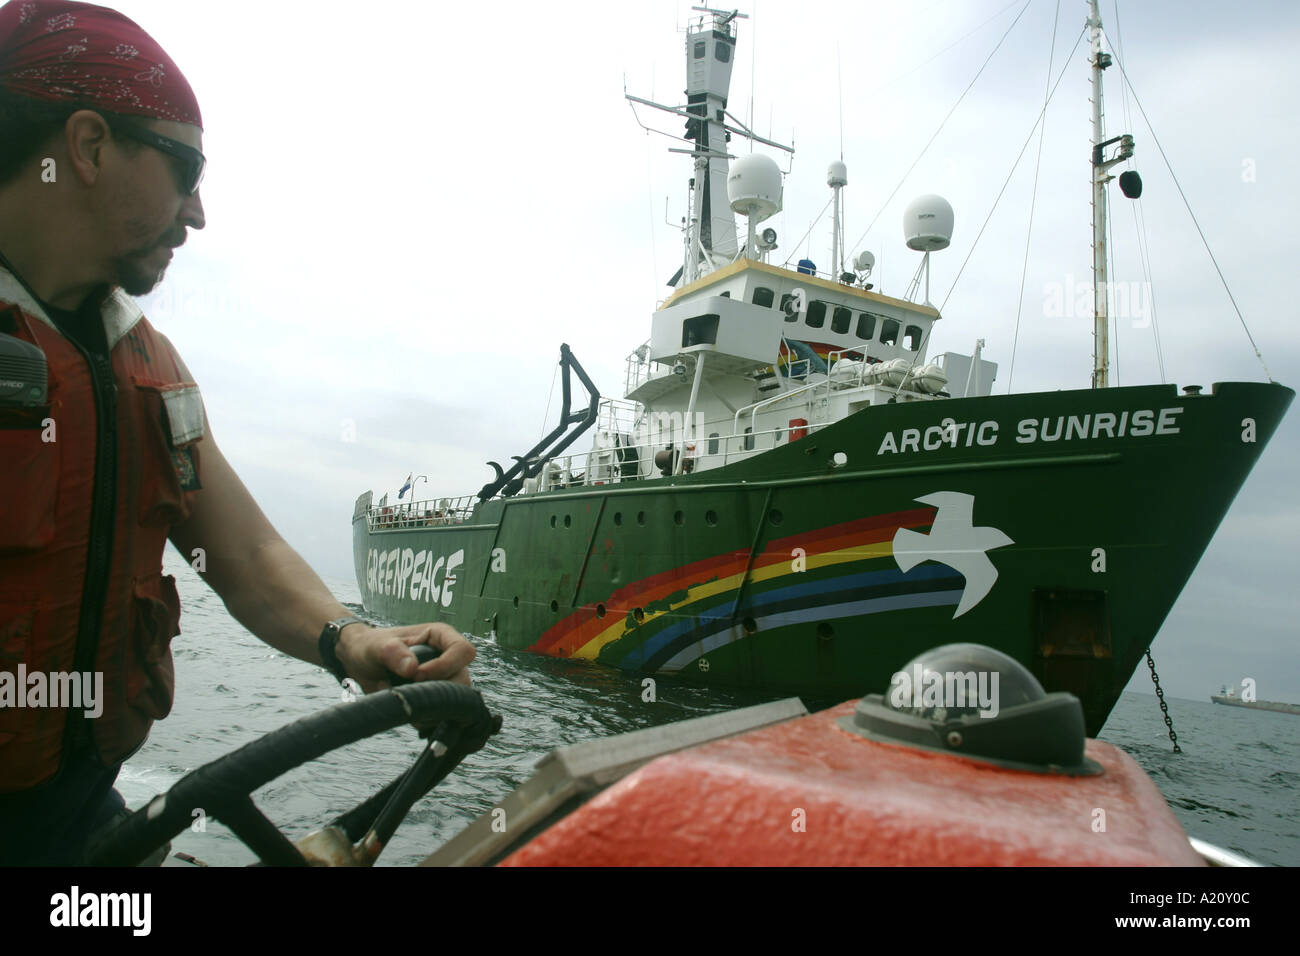 MV Arctic Sunrise, one of the three ships owned by environmental protest group Greenpeace Stock Photo